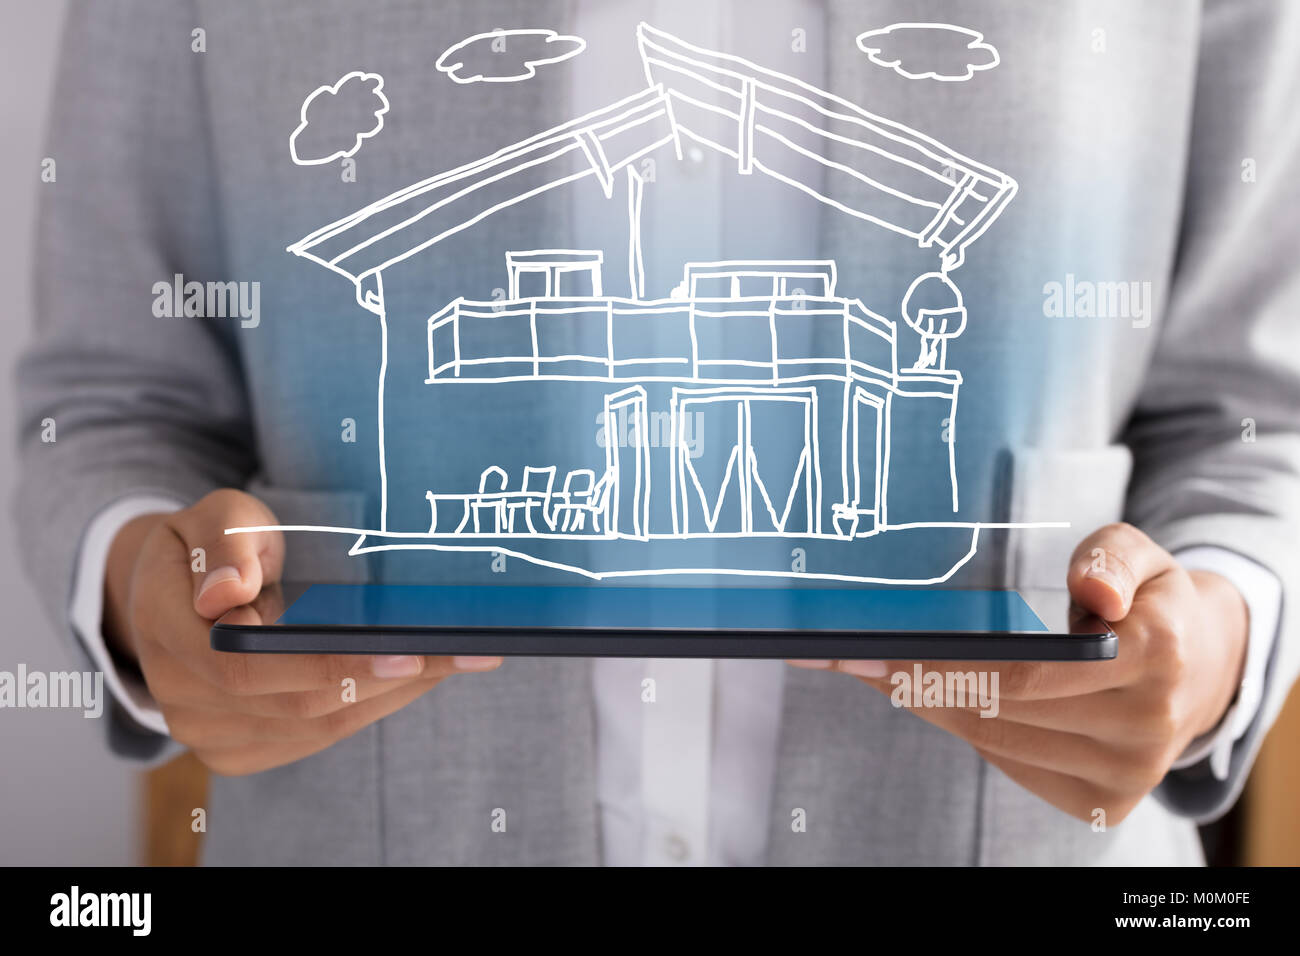 Midsection Of Businessperson Showing Model Home Over Digital Tablet Stock Photo